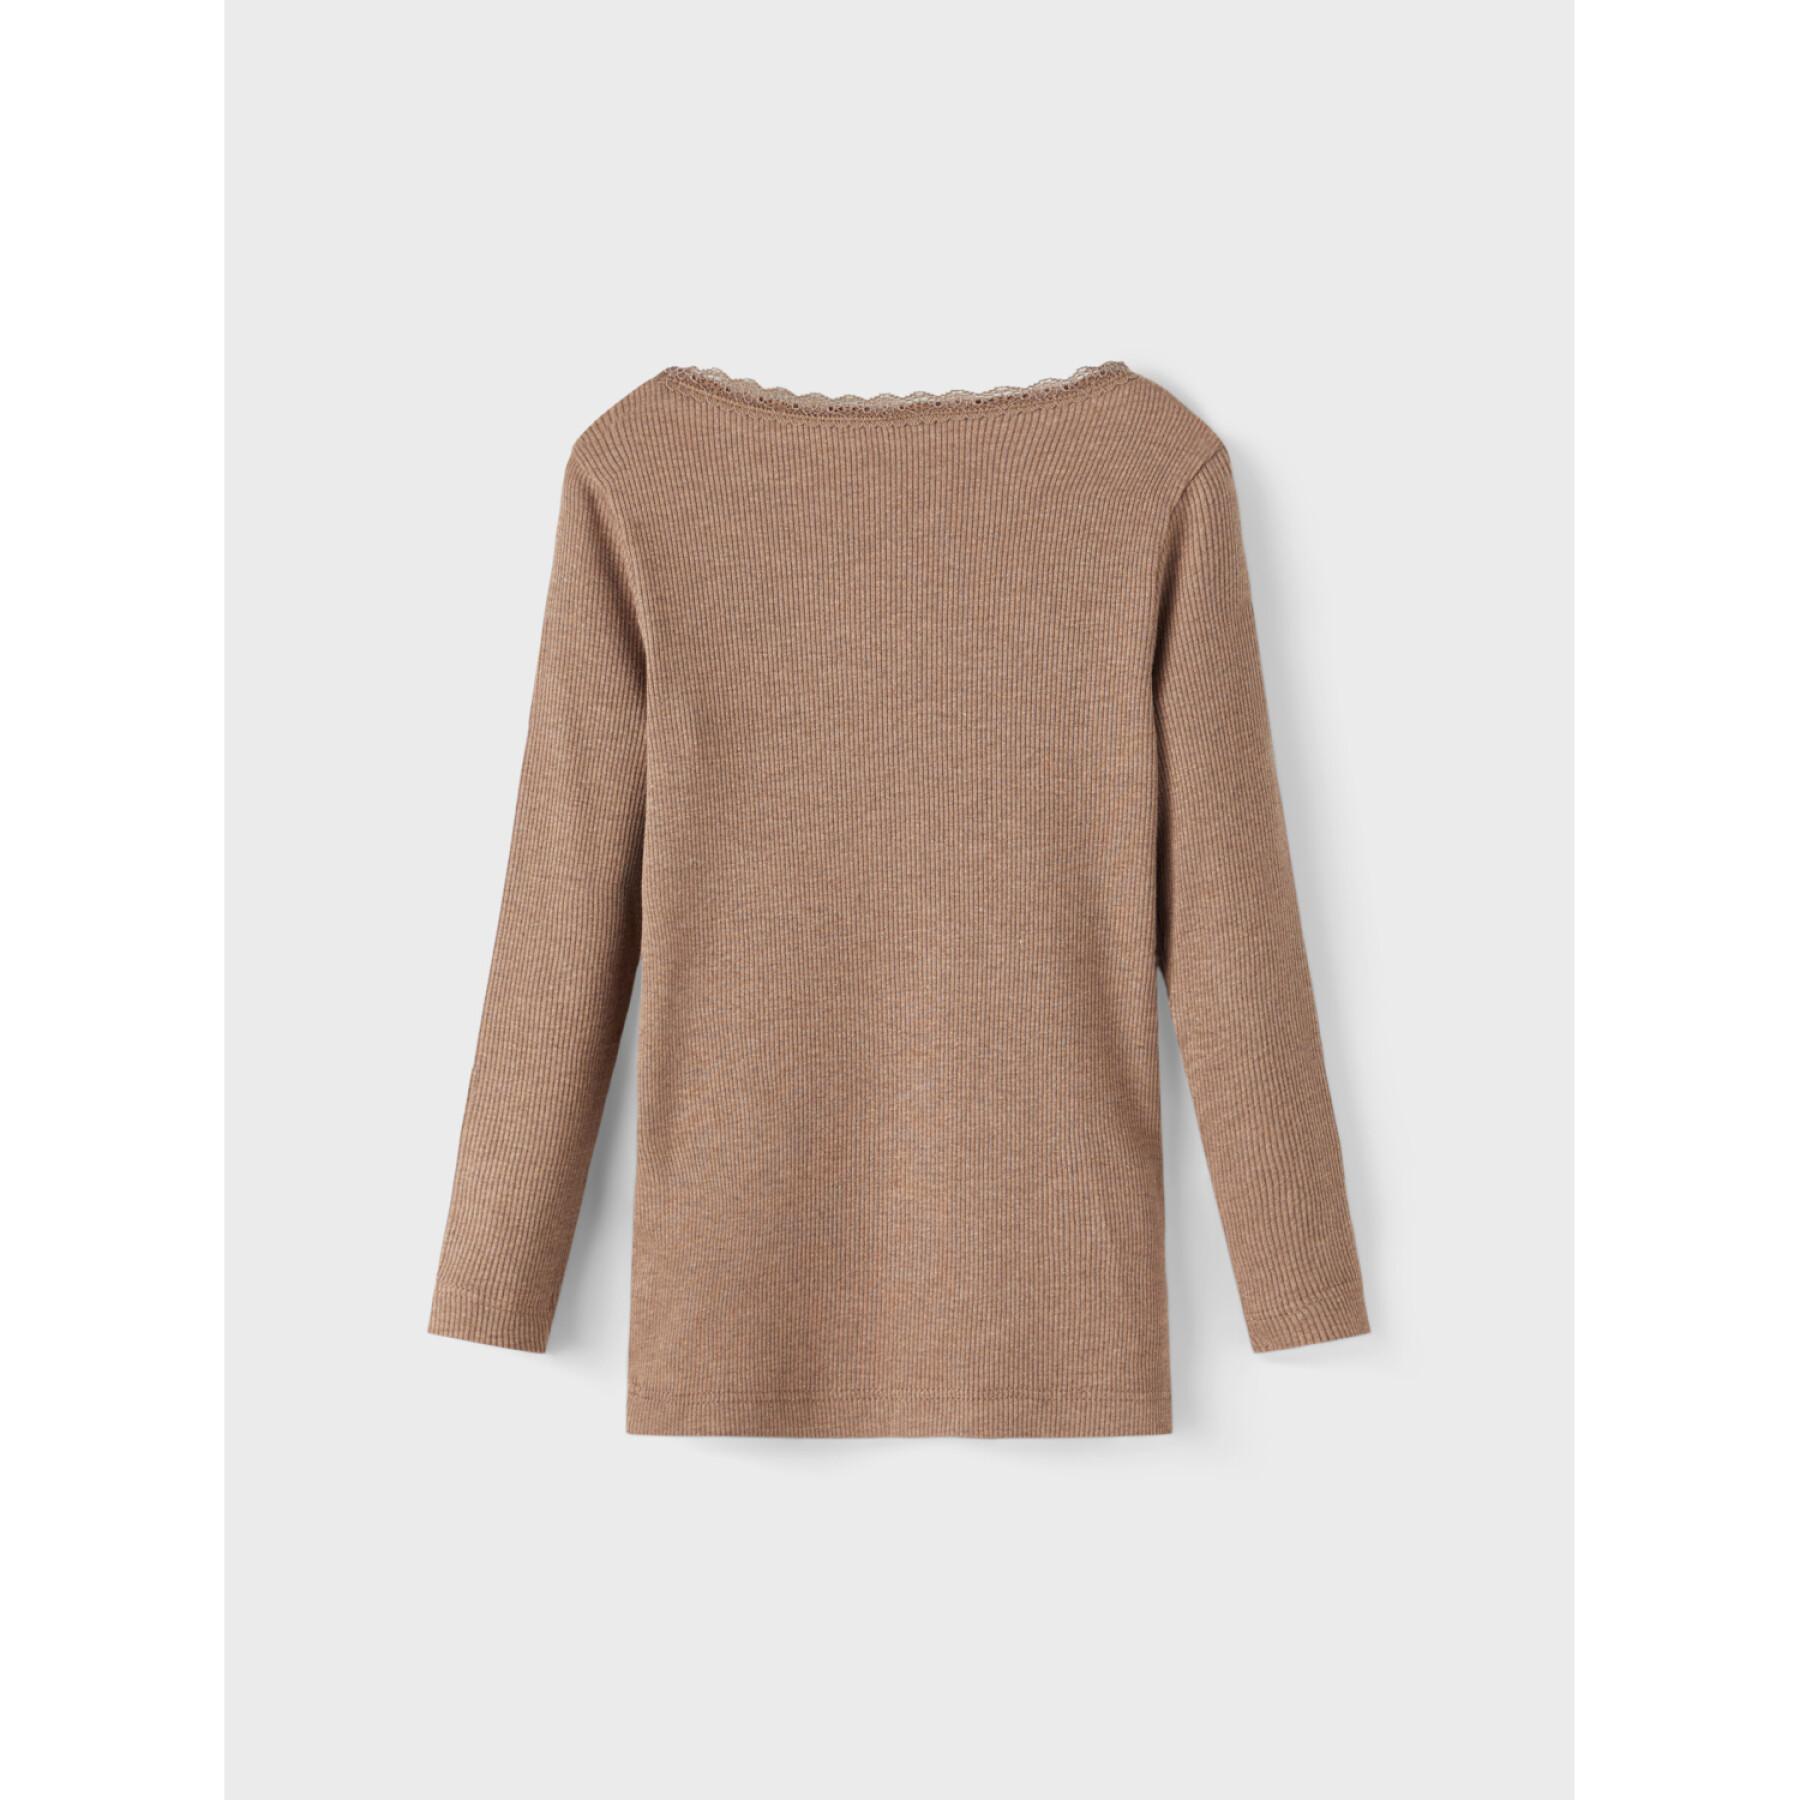 Girl's long sleeve sweater Name it Kab